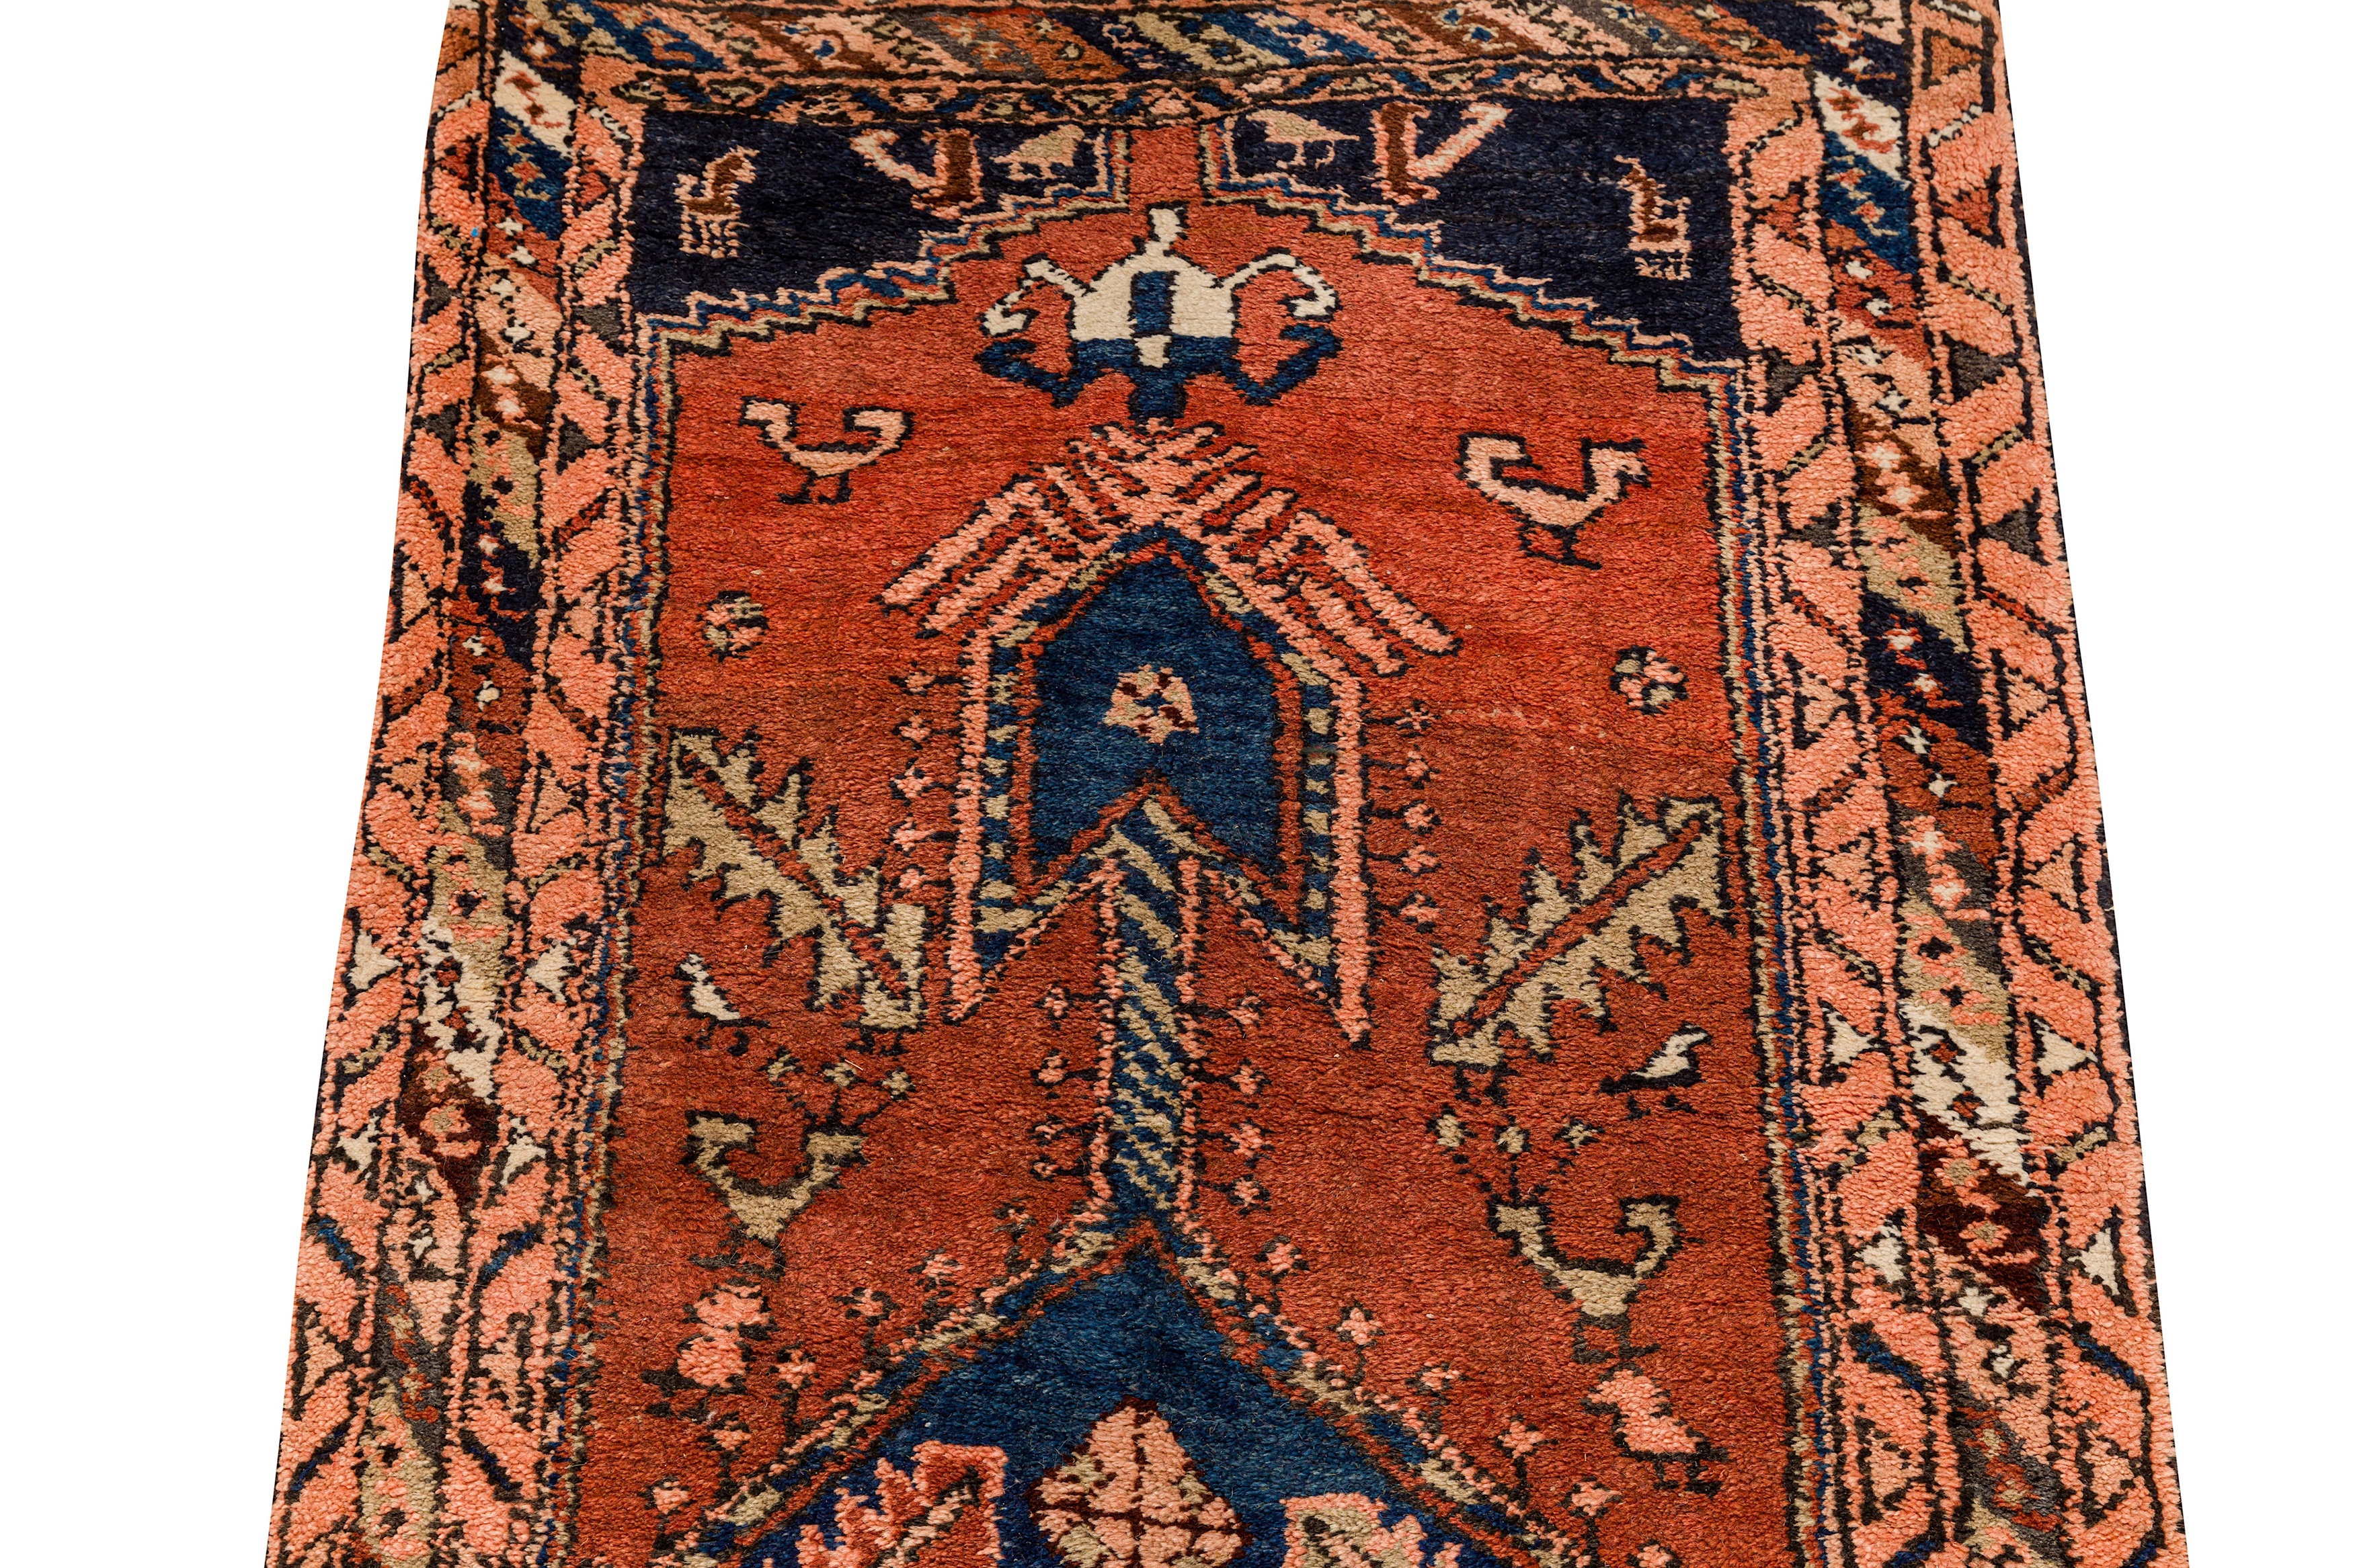 A FINE HERIZ RUNNER, NORTH-WEST PERSIA - Image 3 of 9